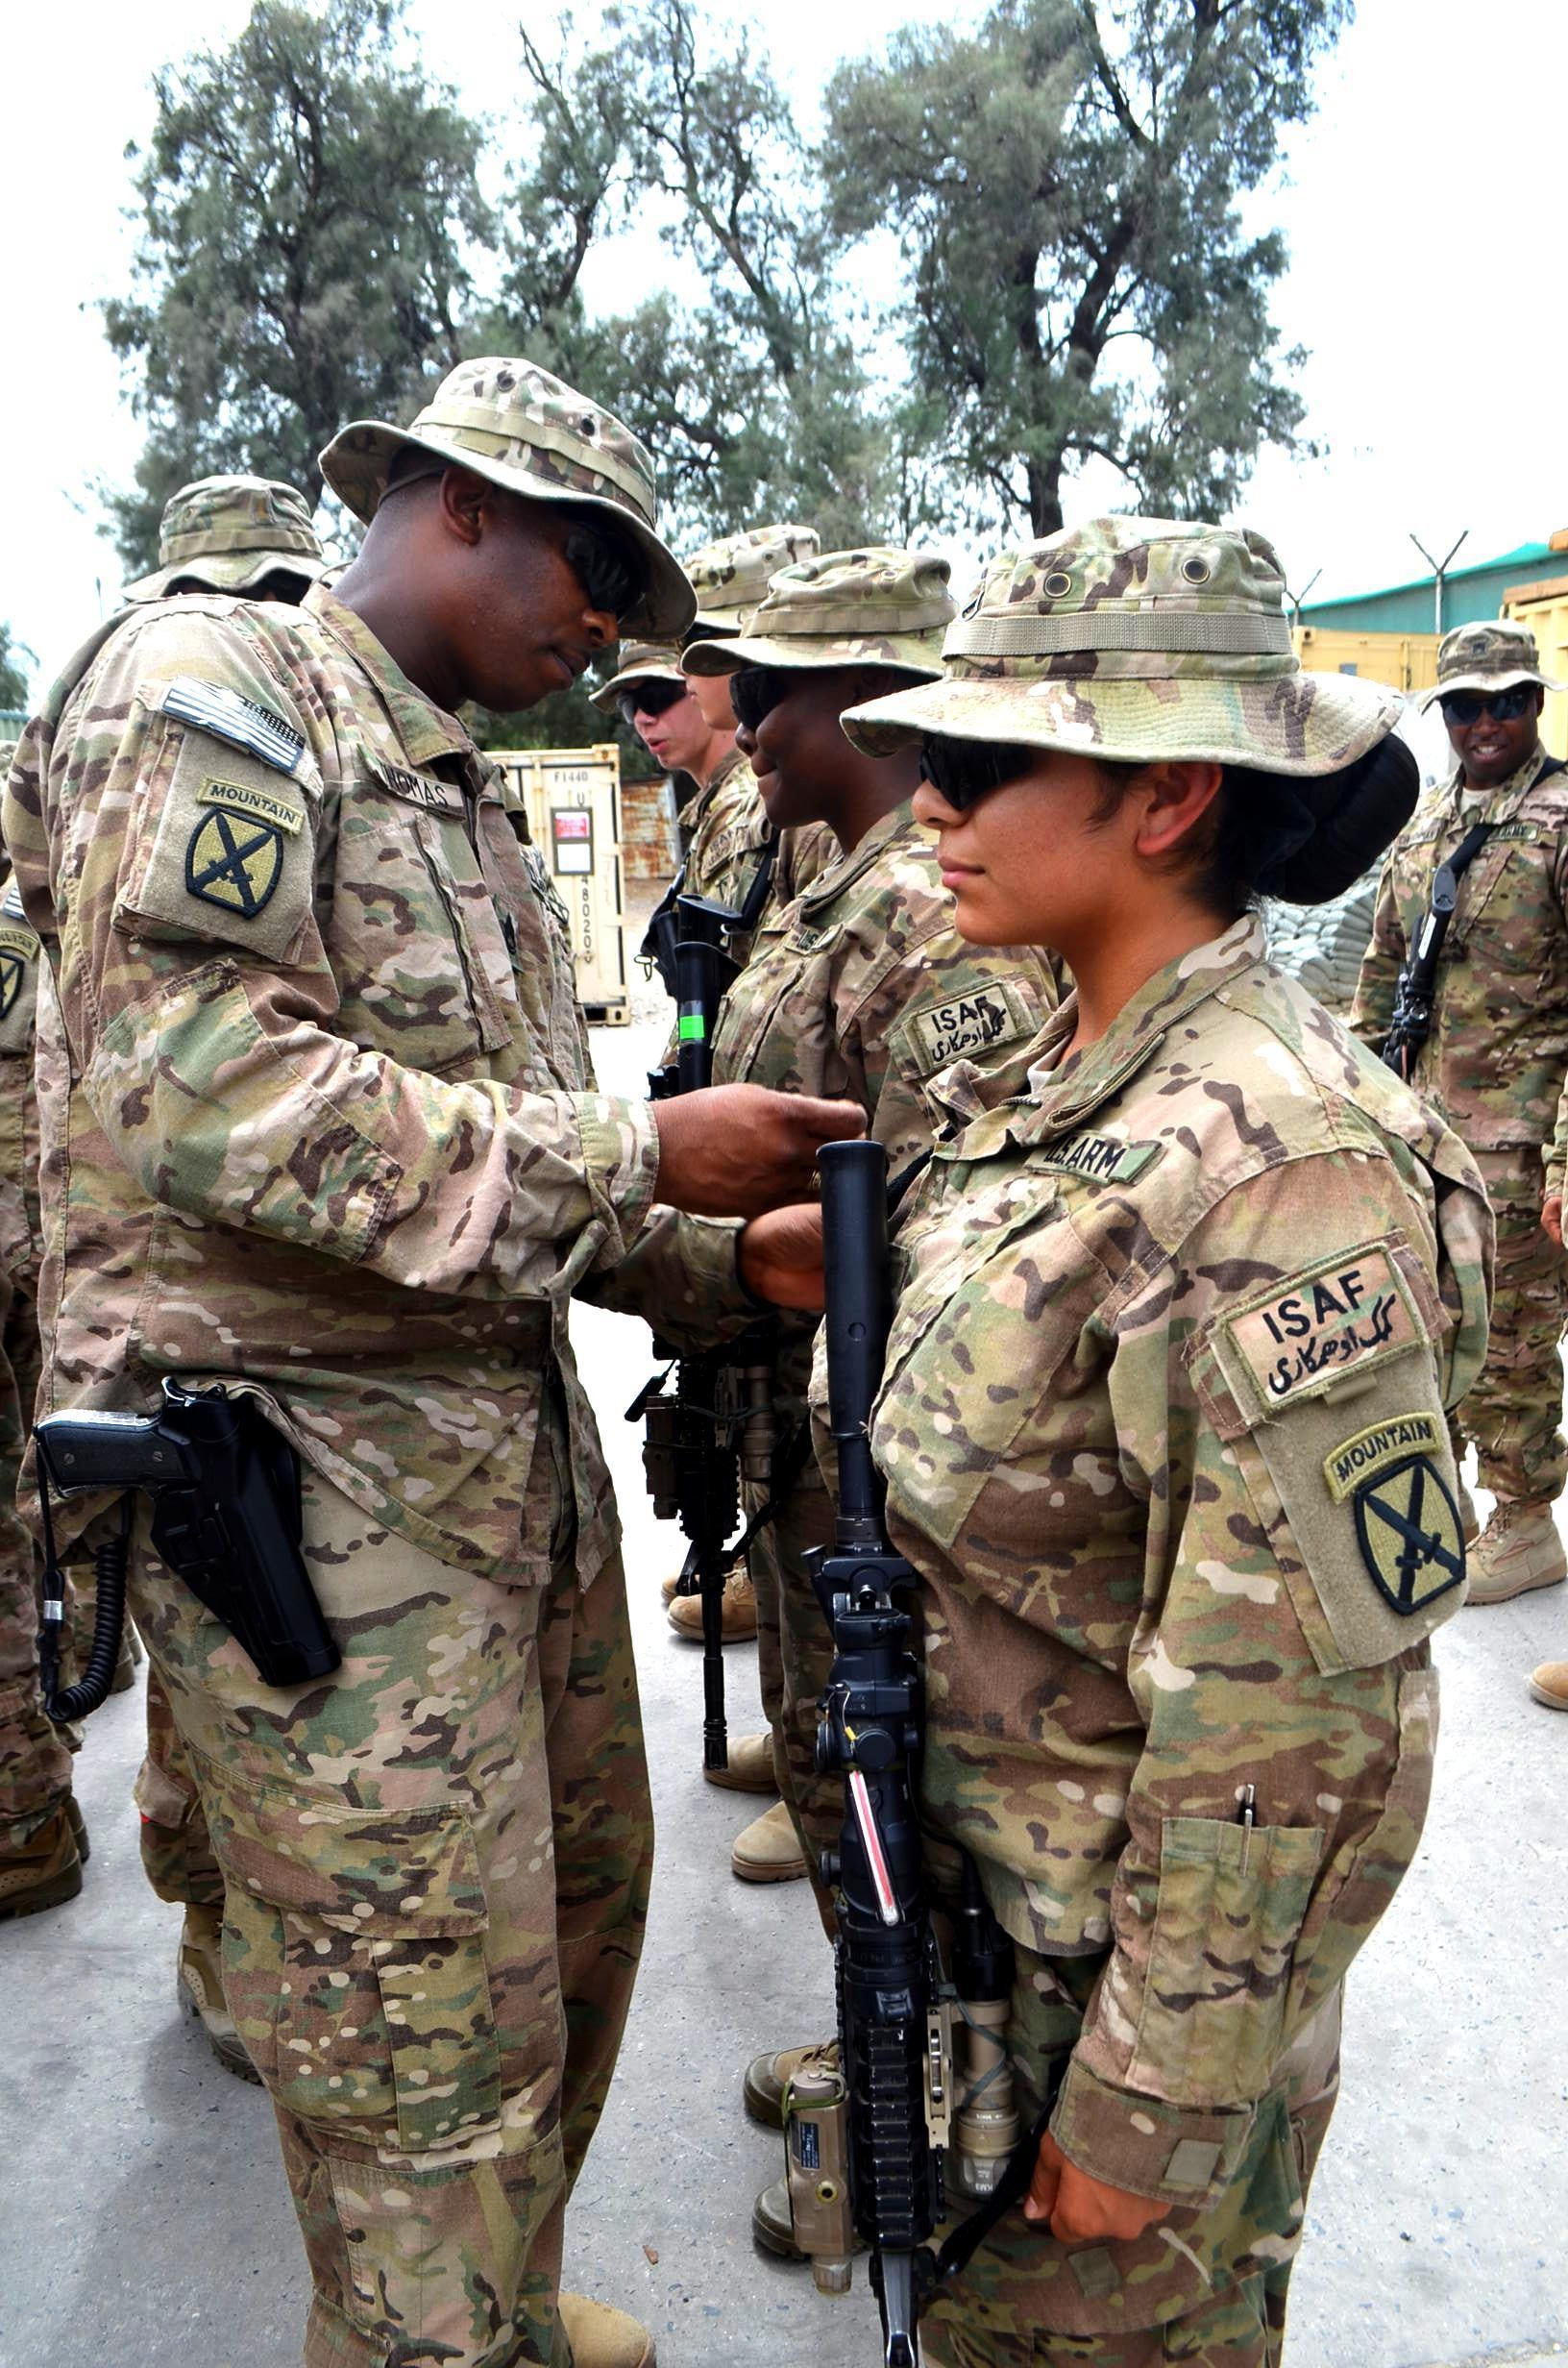 U.S. Army Sgt. 1st Class Ricky Thomas, operations noncommisioned officer in charge, 4th Brigade Special Troops Battalion, Task Force Dagger, from Ville Platte, La., places a 10th Mountain Division Patch on the right shoulder of Pfc. Michelle Garcia, a human resources specialist with 4th BSTB from Belton, Texas, during the battalion's deployment patch ceremony at Forward Operating Base Fenty Aug. 17, 2013. Soldiers earn the right to wear an organization's patch on their right shoulder when they serve with that unit in combat. TF Dagger is part of 4th Brigade, 10th Mountain Division, based out of Fort Polk, La. (U.S. Army Photo by Sgt. Anna Simms, Task Force Patriot)